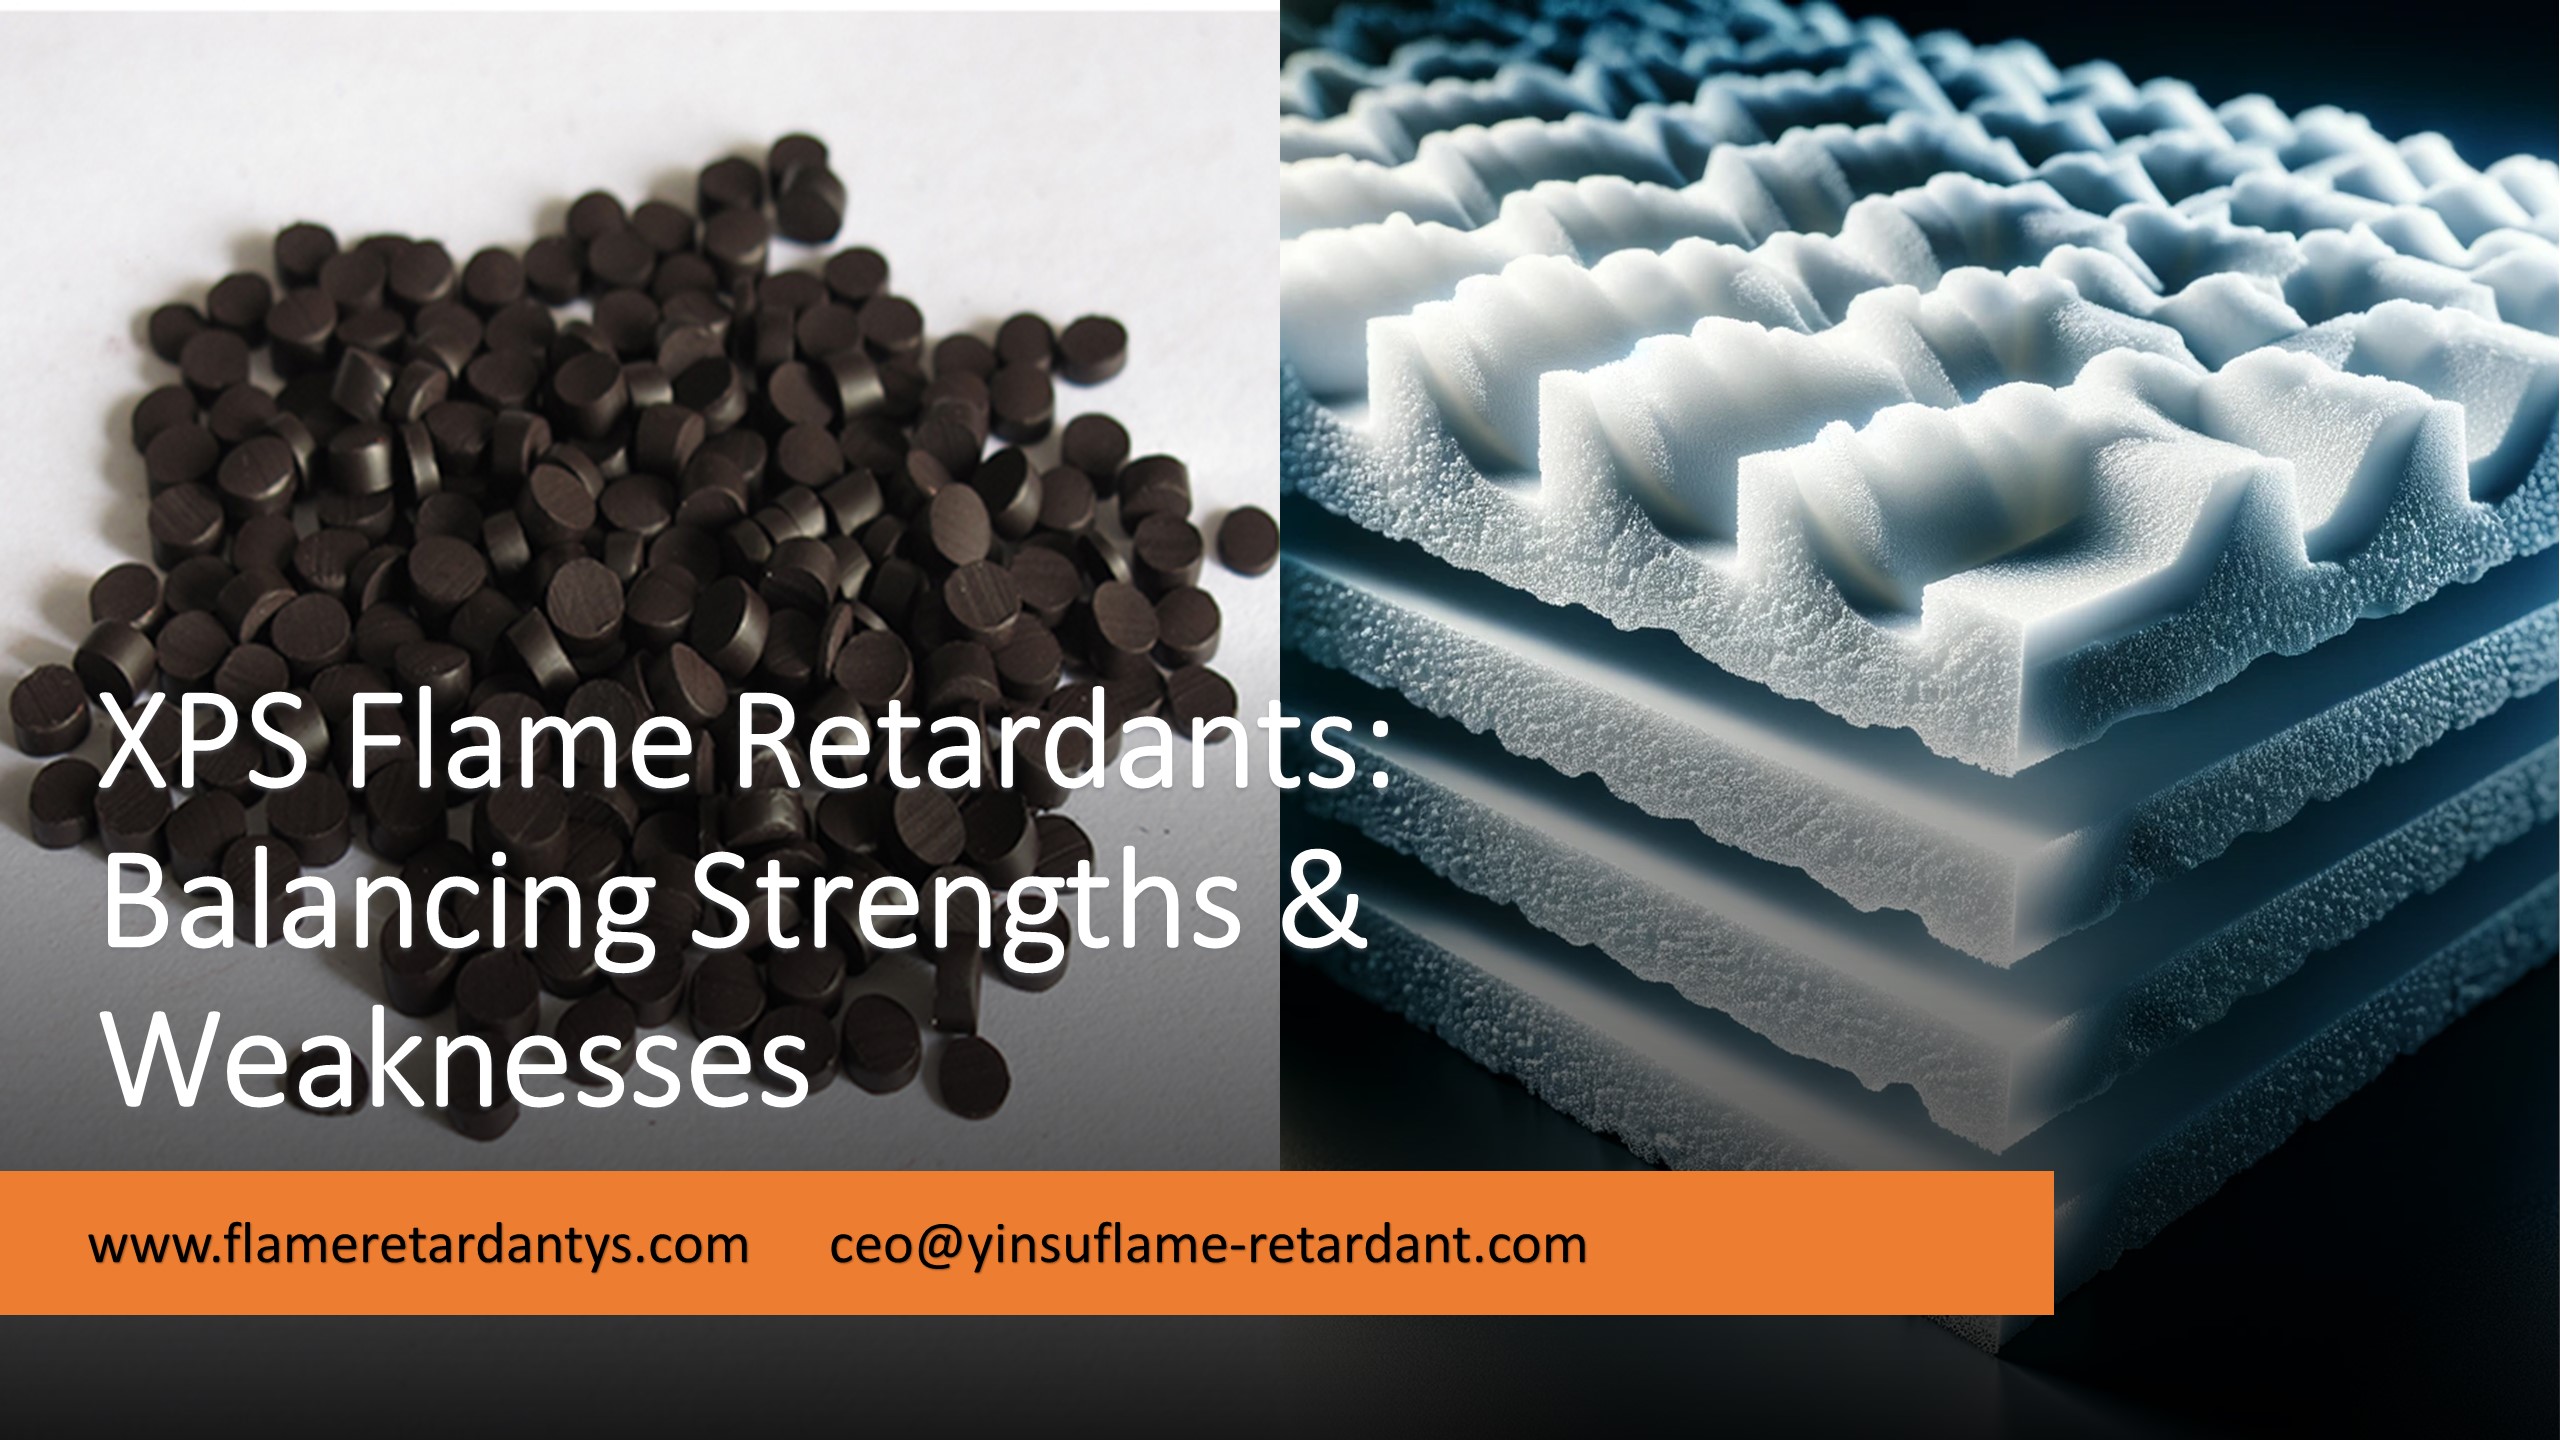 XPS Flame Retardants: Balancing Strengths And Weaknesses